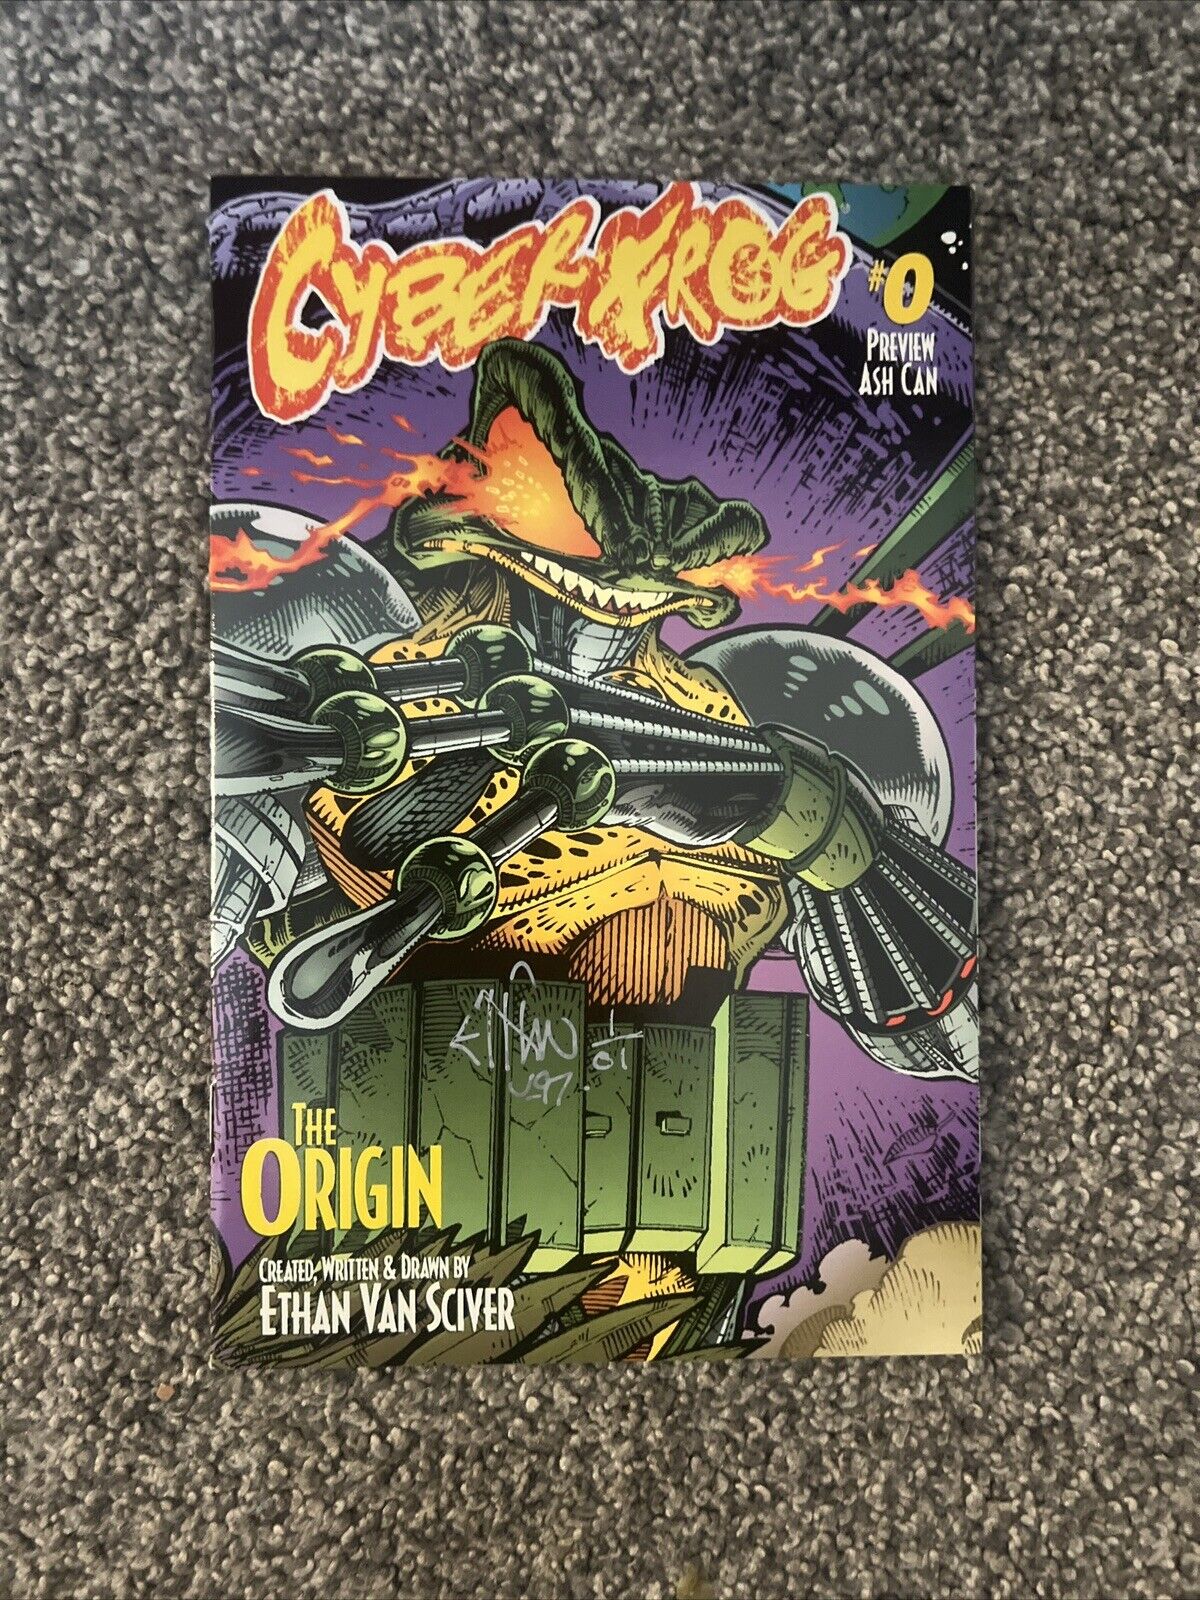 Cyberfrog #0 Preview Signed By Ethan Van Sciver. 9.8. Great Collector’s Comic.